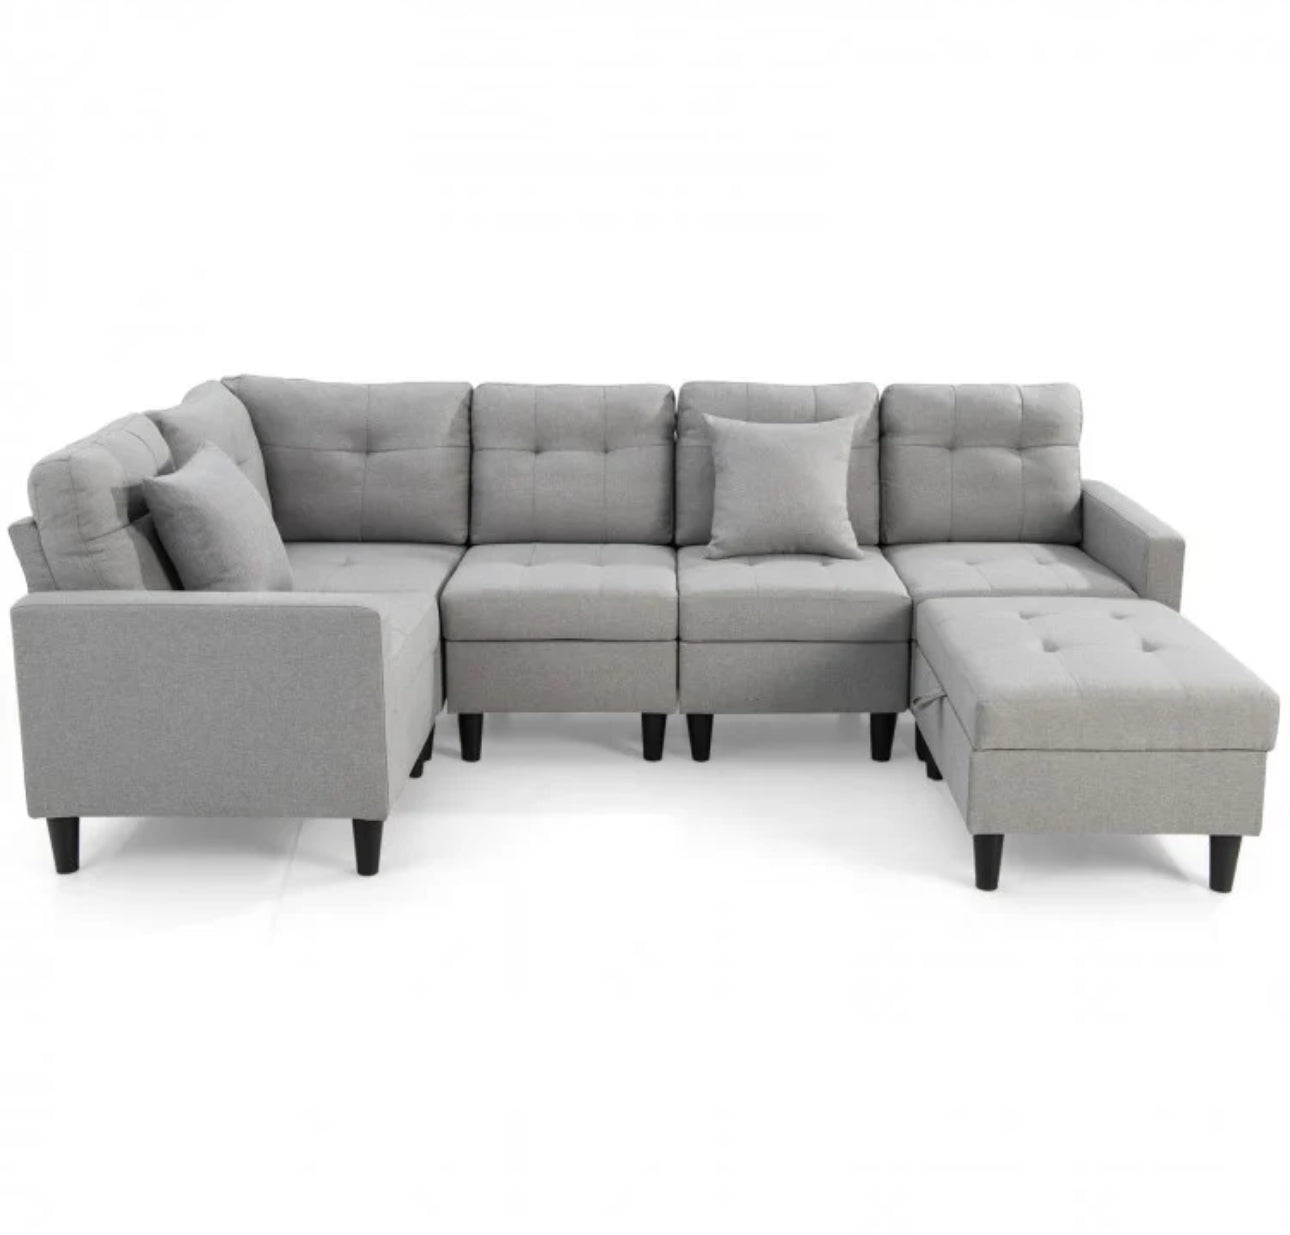 Gorgeous Heavy Duty Relaxing L-Shaped Sectional Corner Sofa Couch Set With Storage Ottoman | Wide Armrest | Thick Cushions | Tufted Design